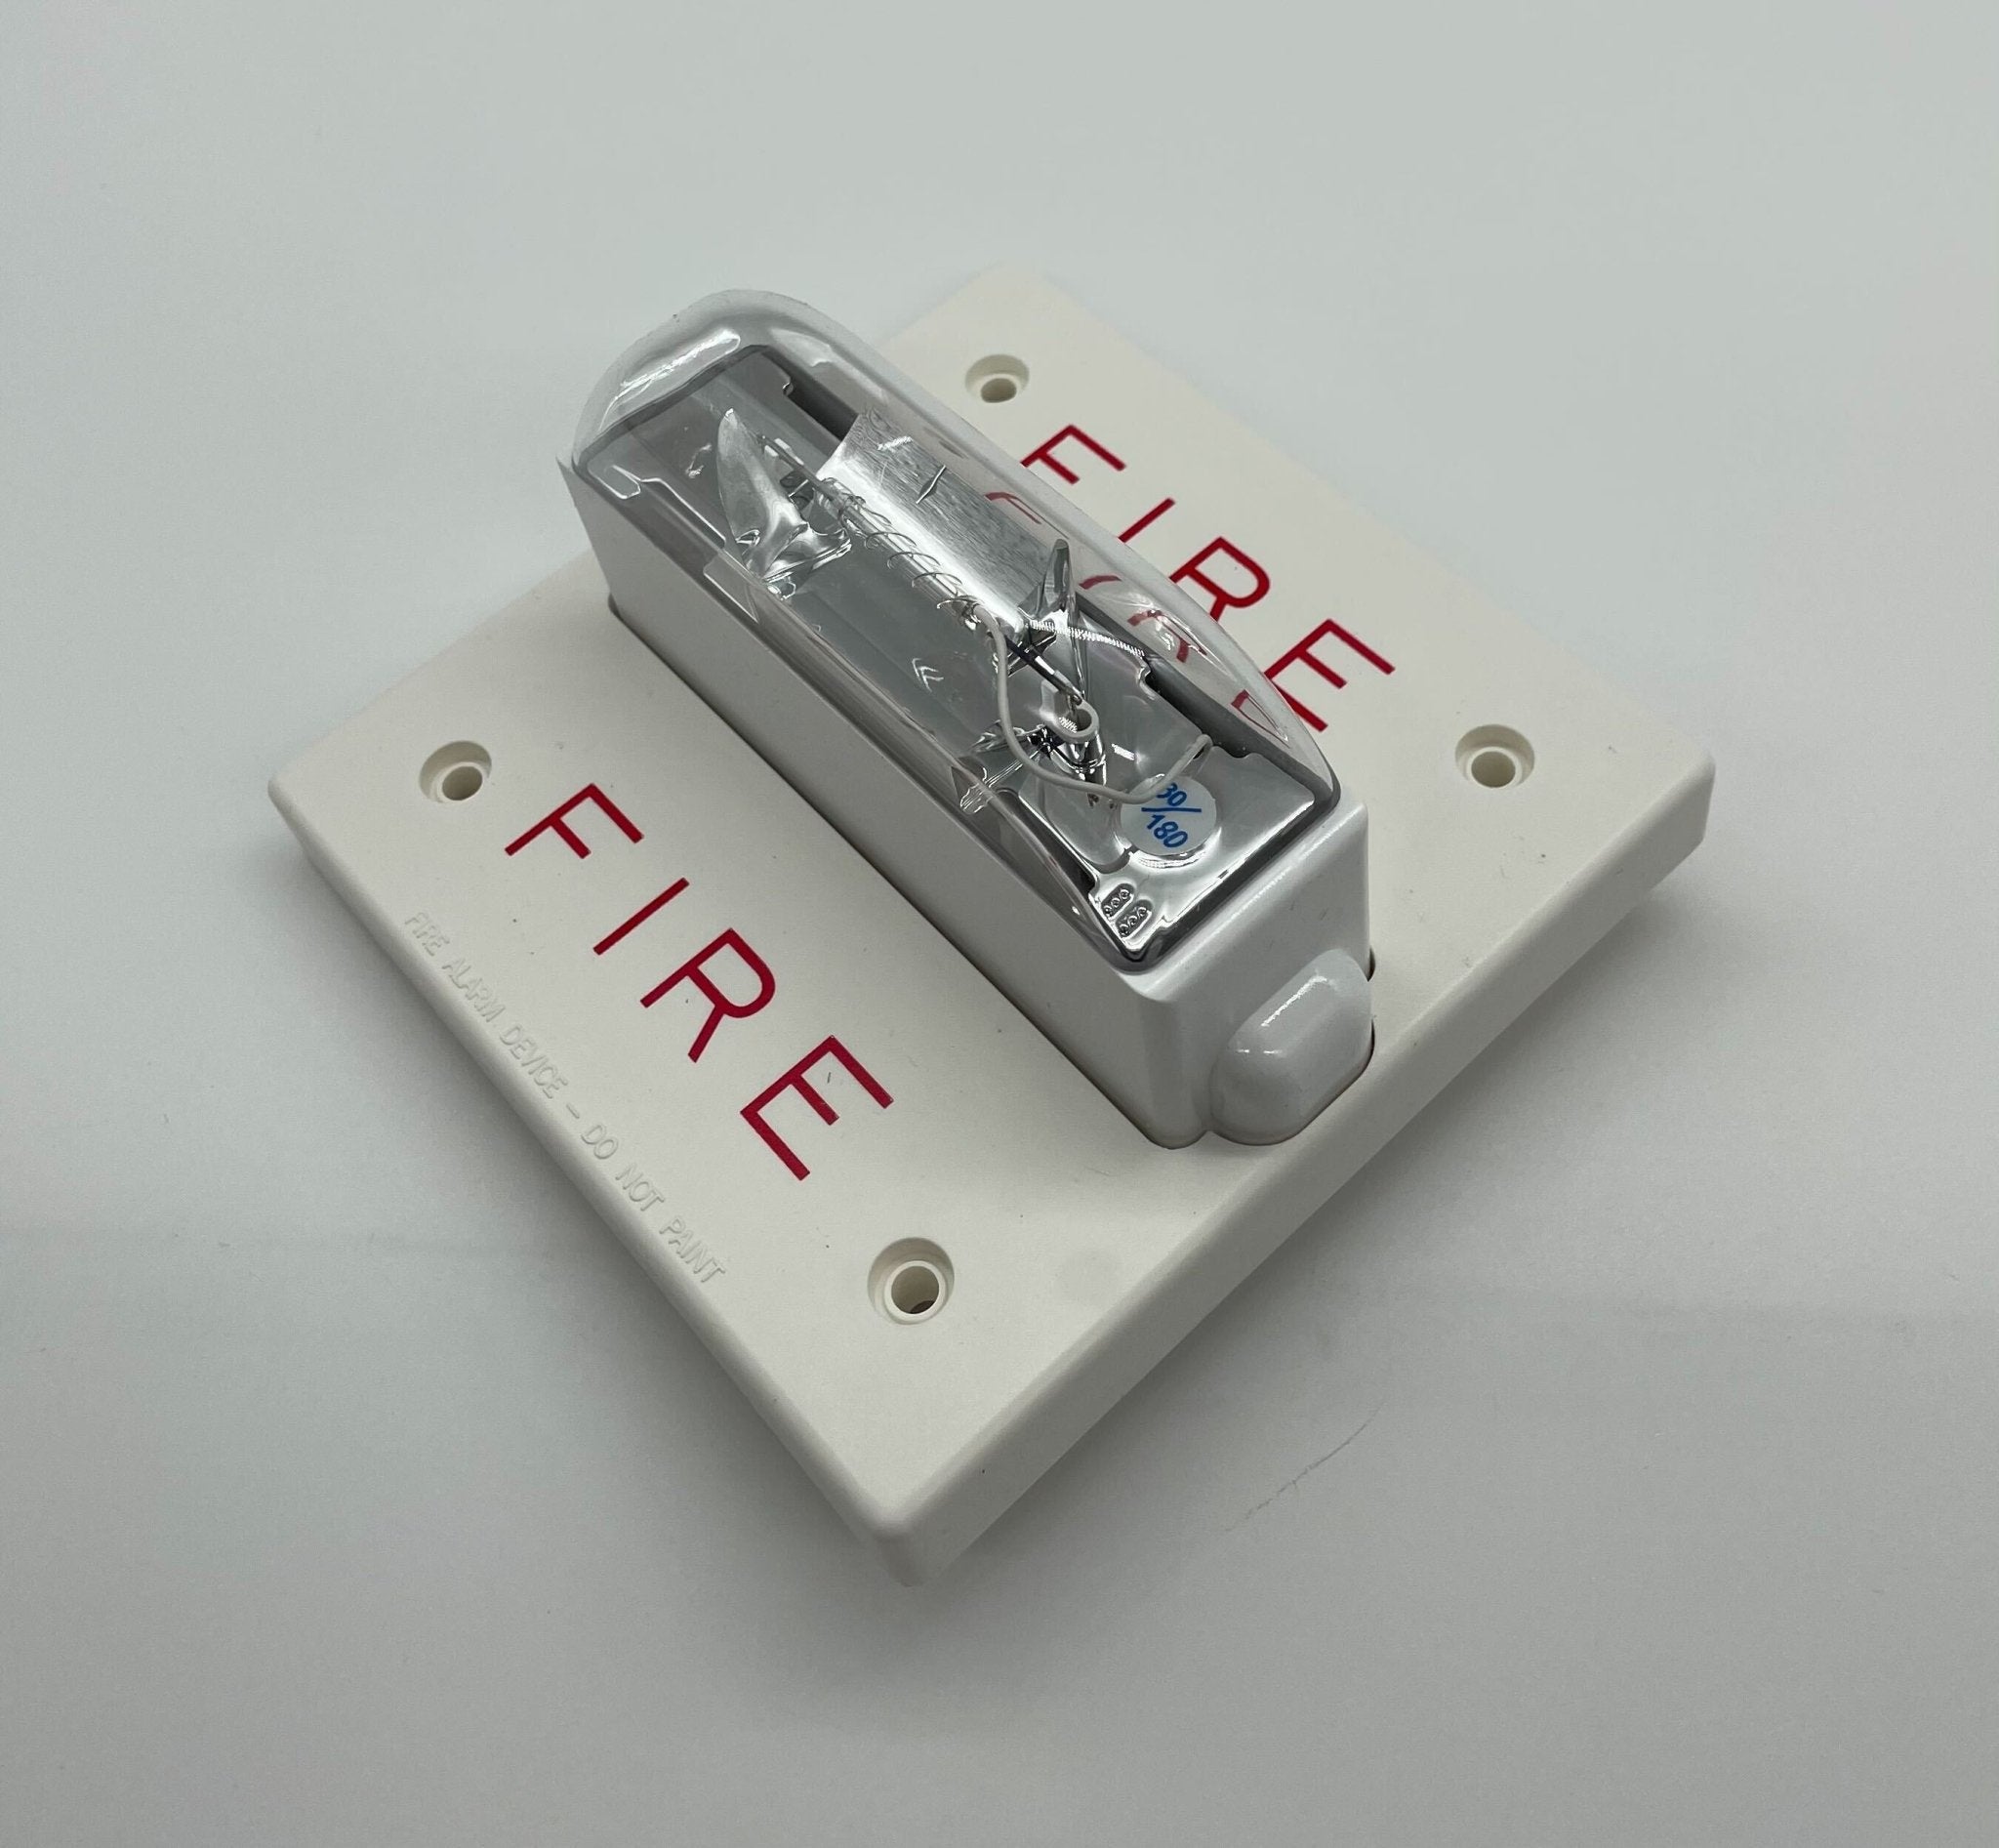 Wheelock RSSWP-2475W-FW - The Fire Alarm Supplier